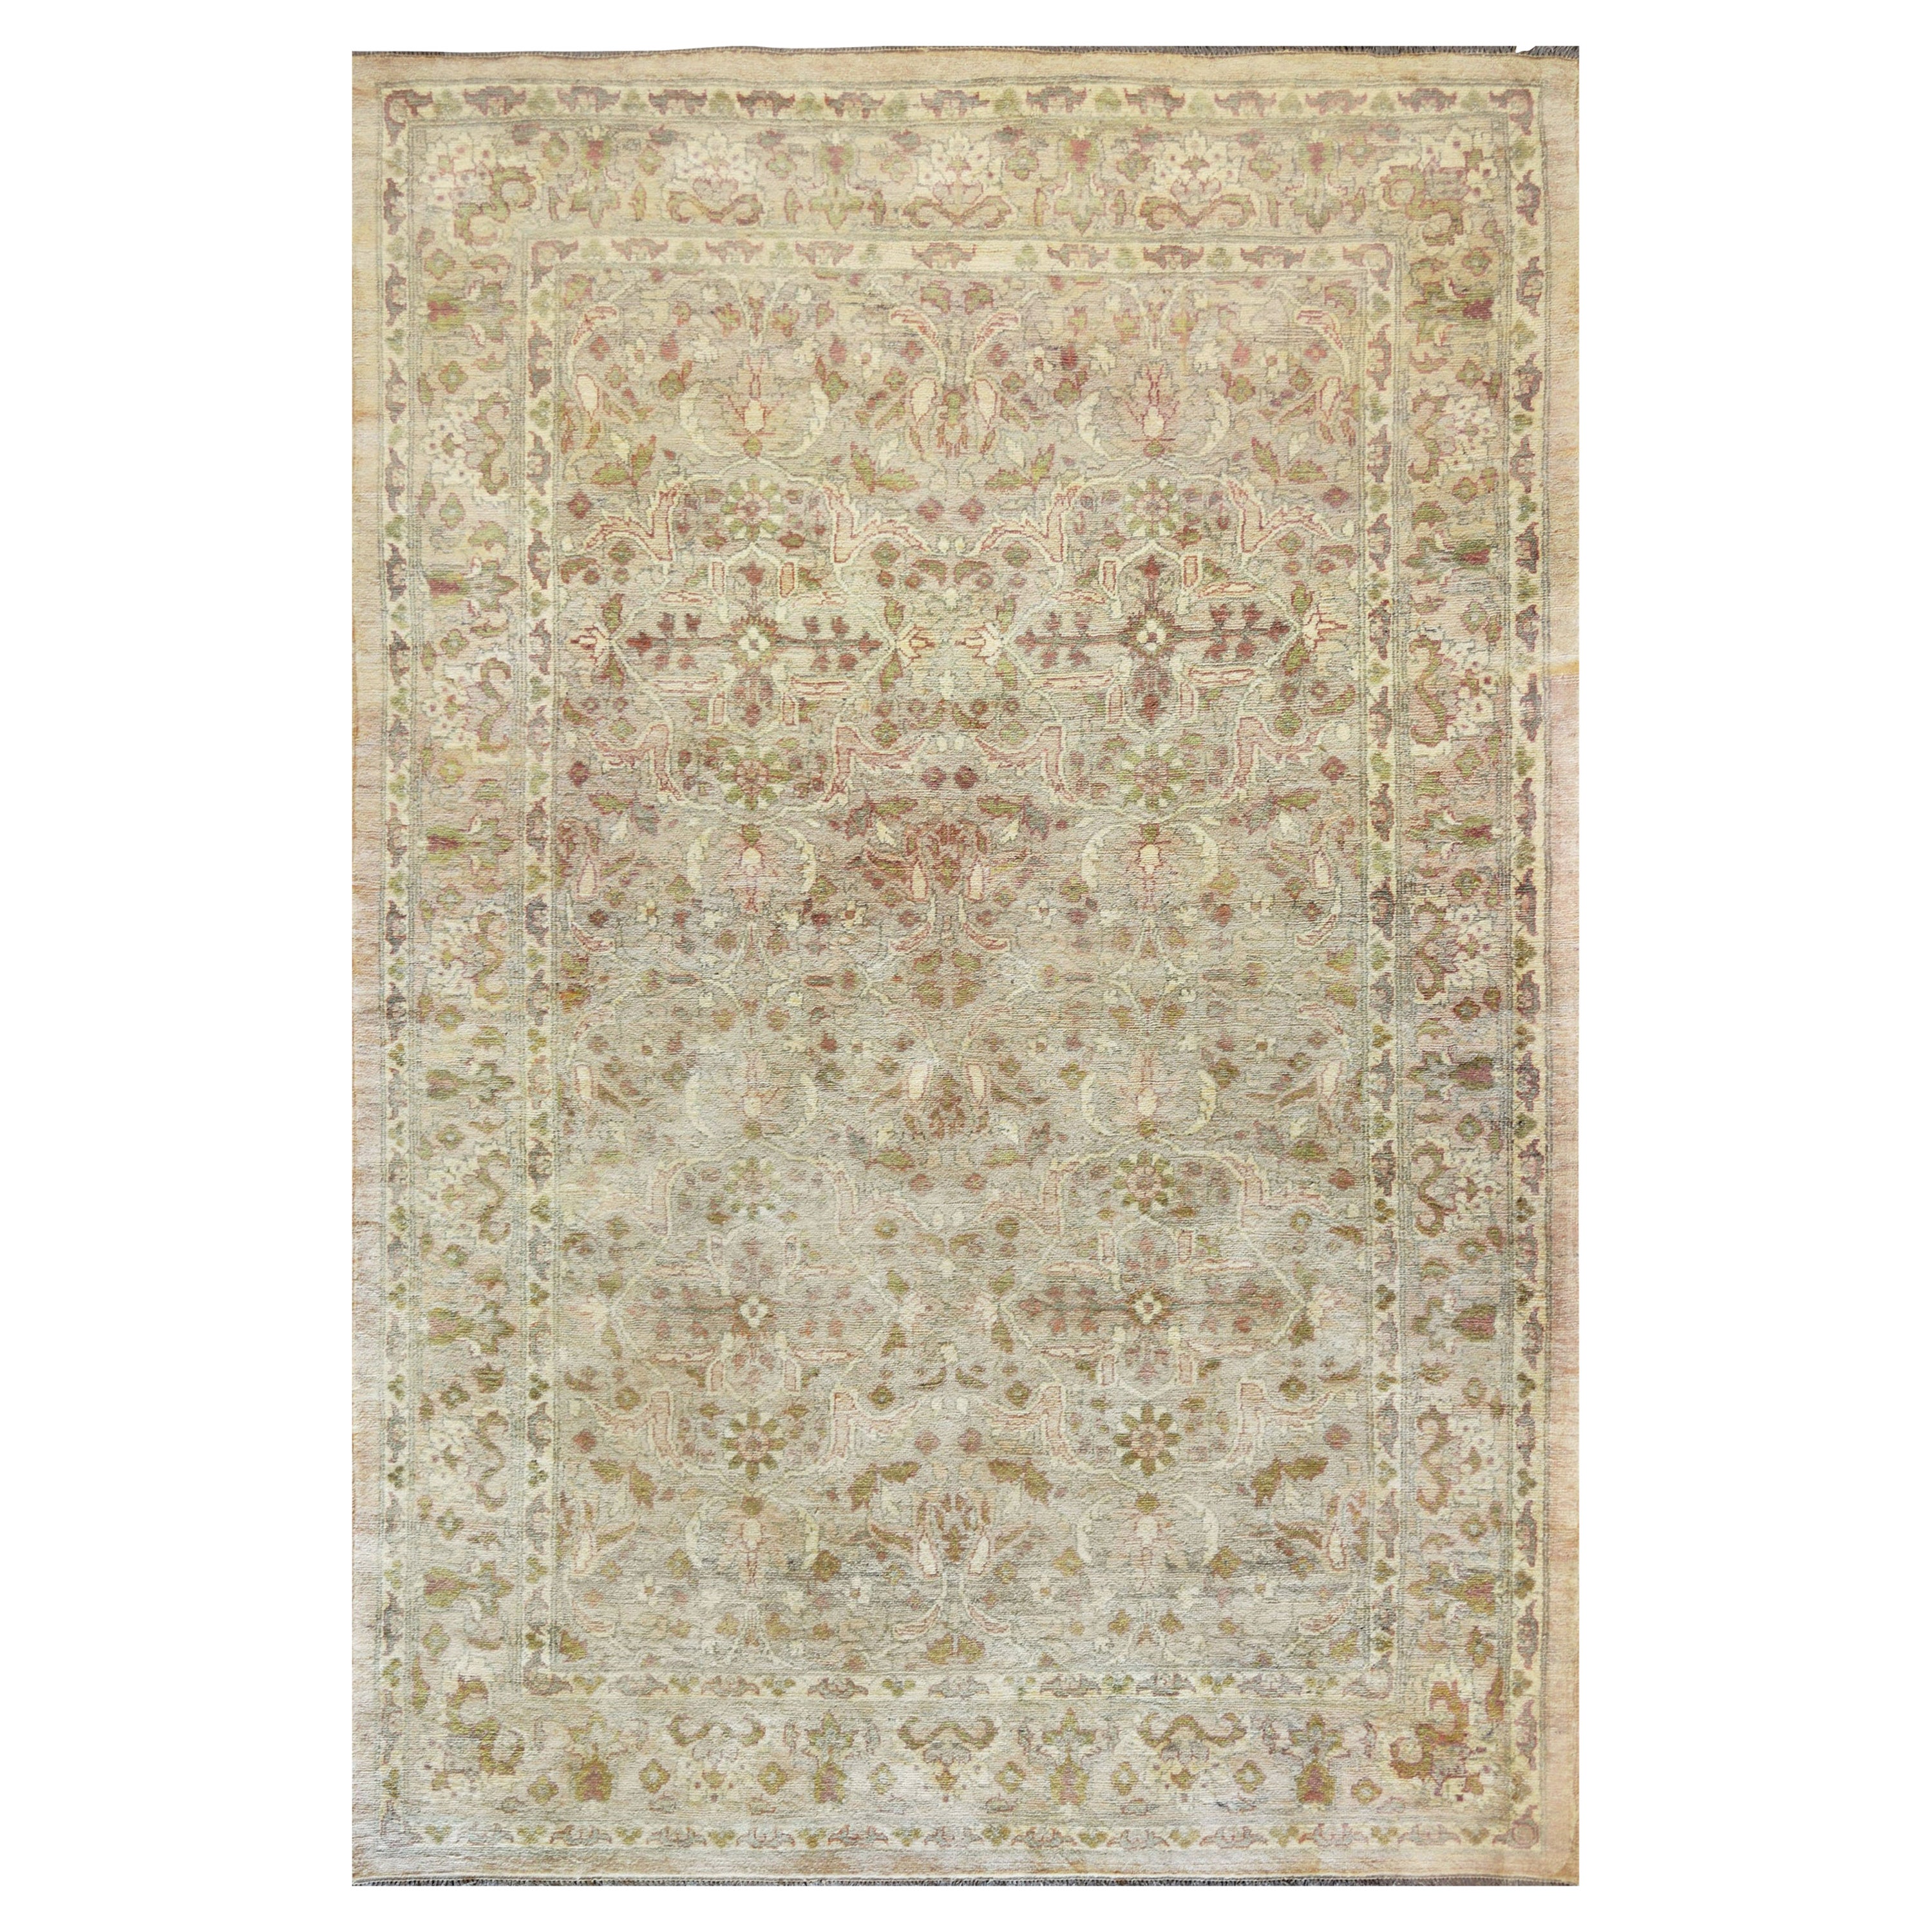 Handwoven Brand New Agra-Inspired 100% Wool Rug For Sale